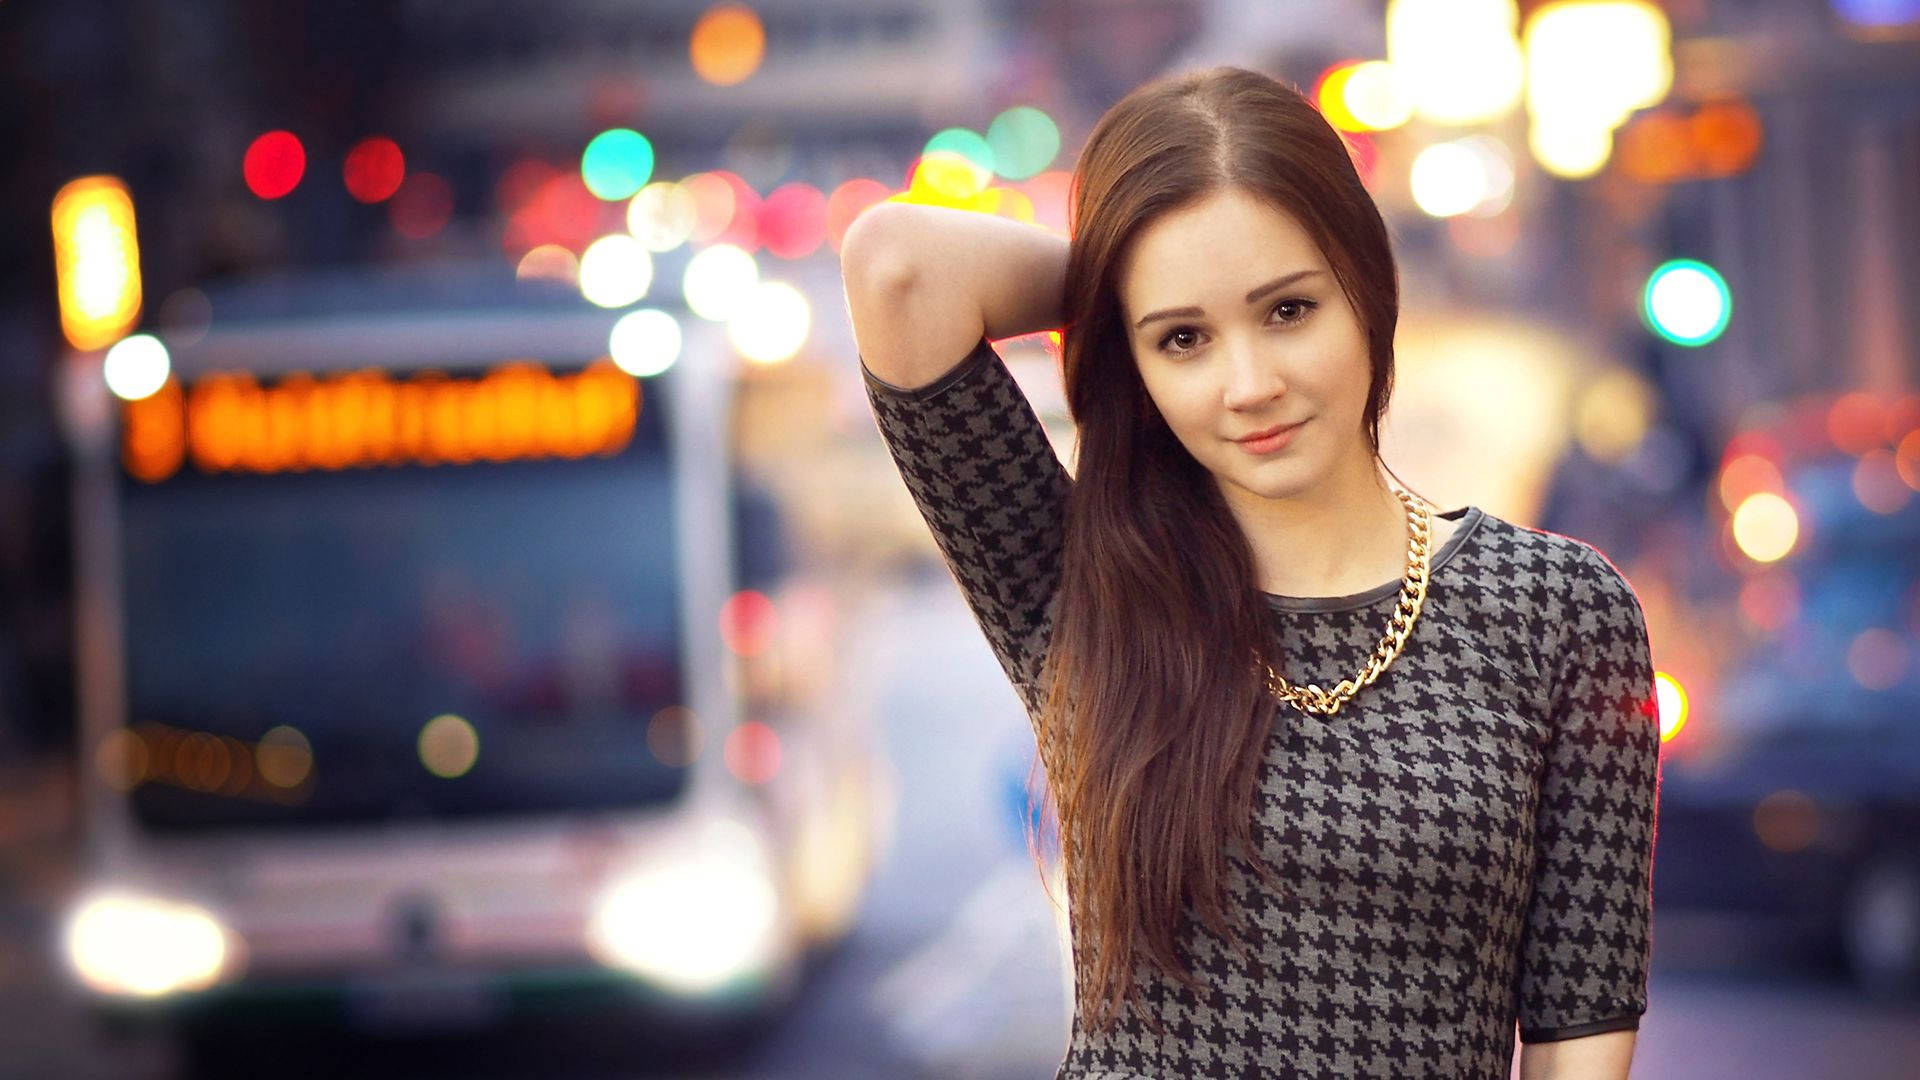 Beautiful Girl In The City Picture